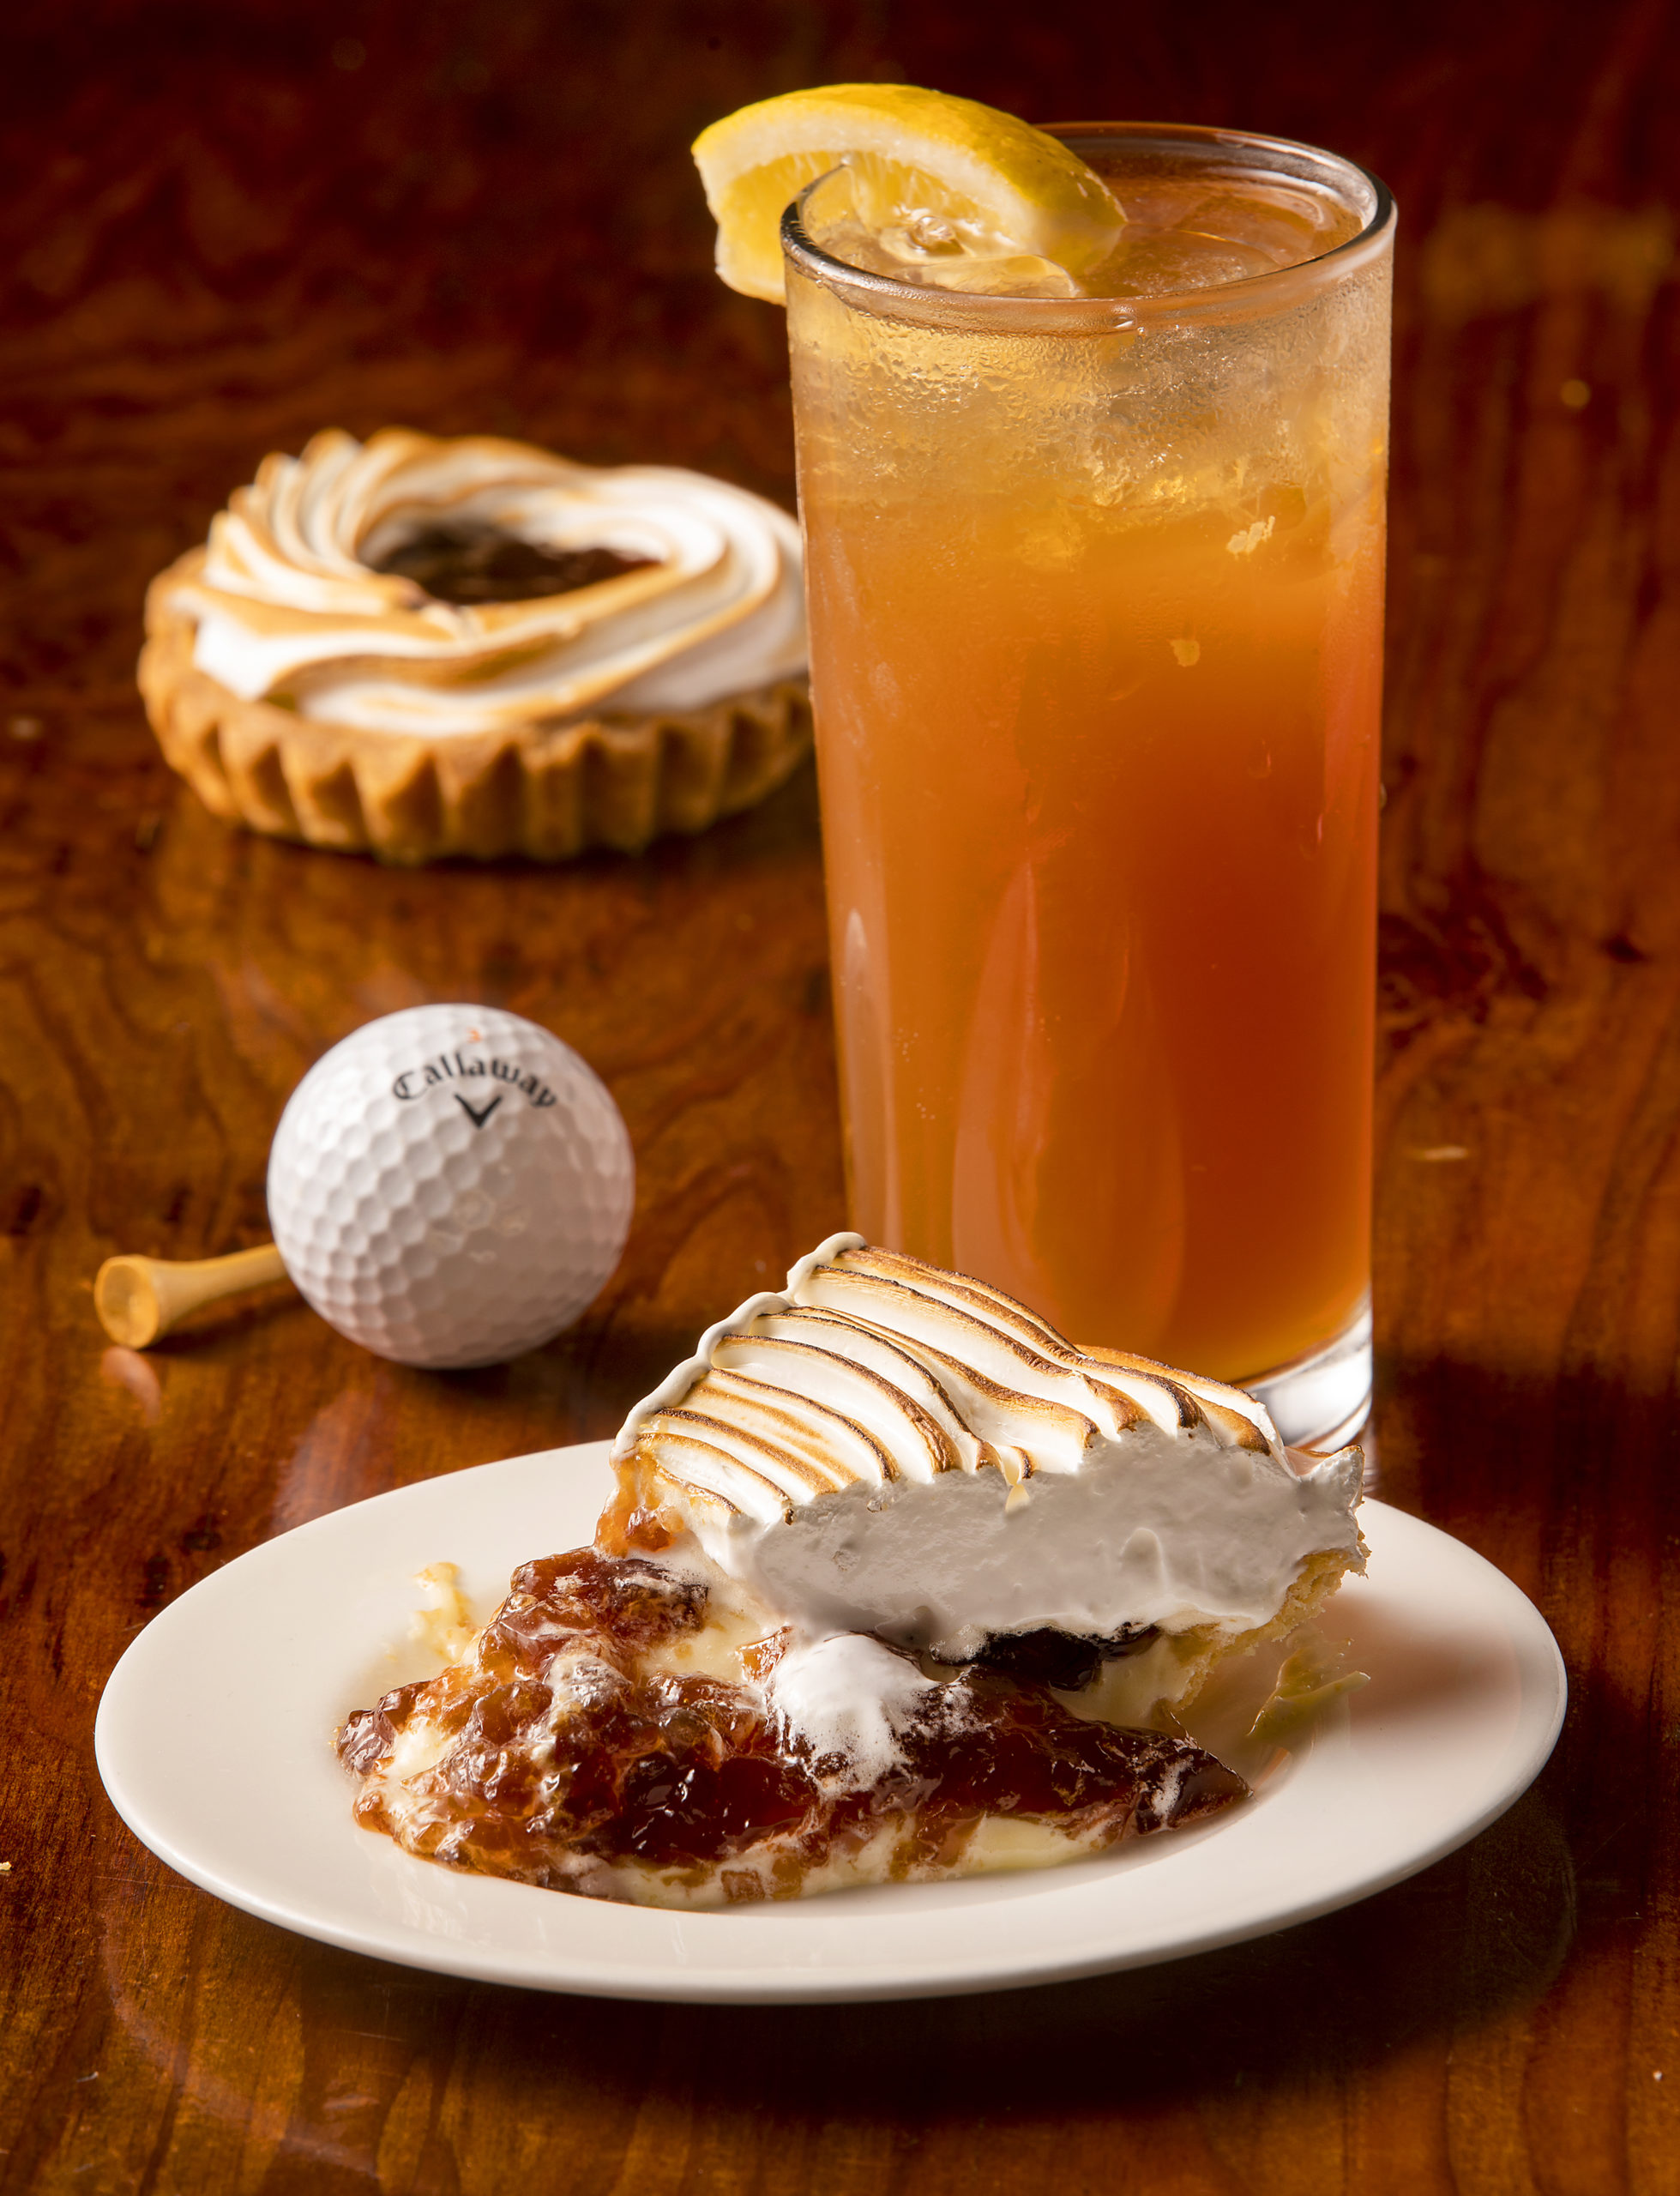 Arnold Palmer Pie, with an Arnold Palmer drink, from The Spinster Sisters pastry chef Nicole Rubio . (Photo by John Burgess/Sonoma Magazine)